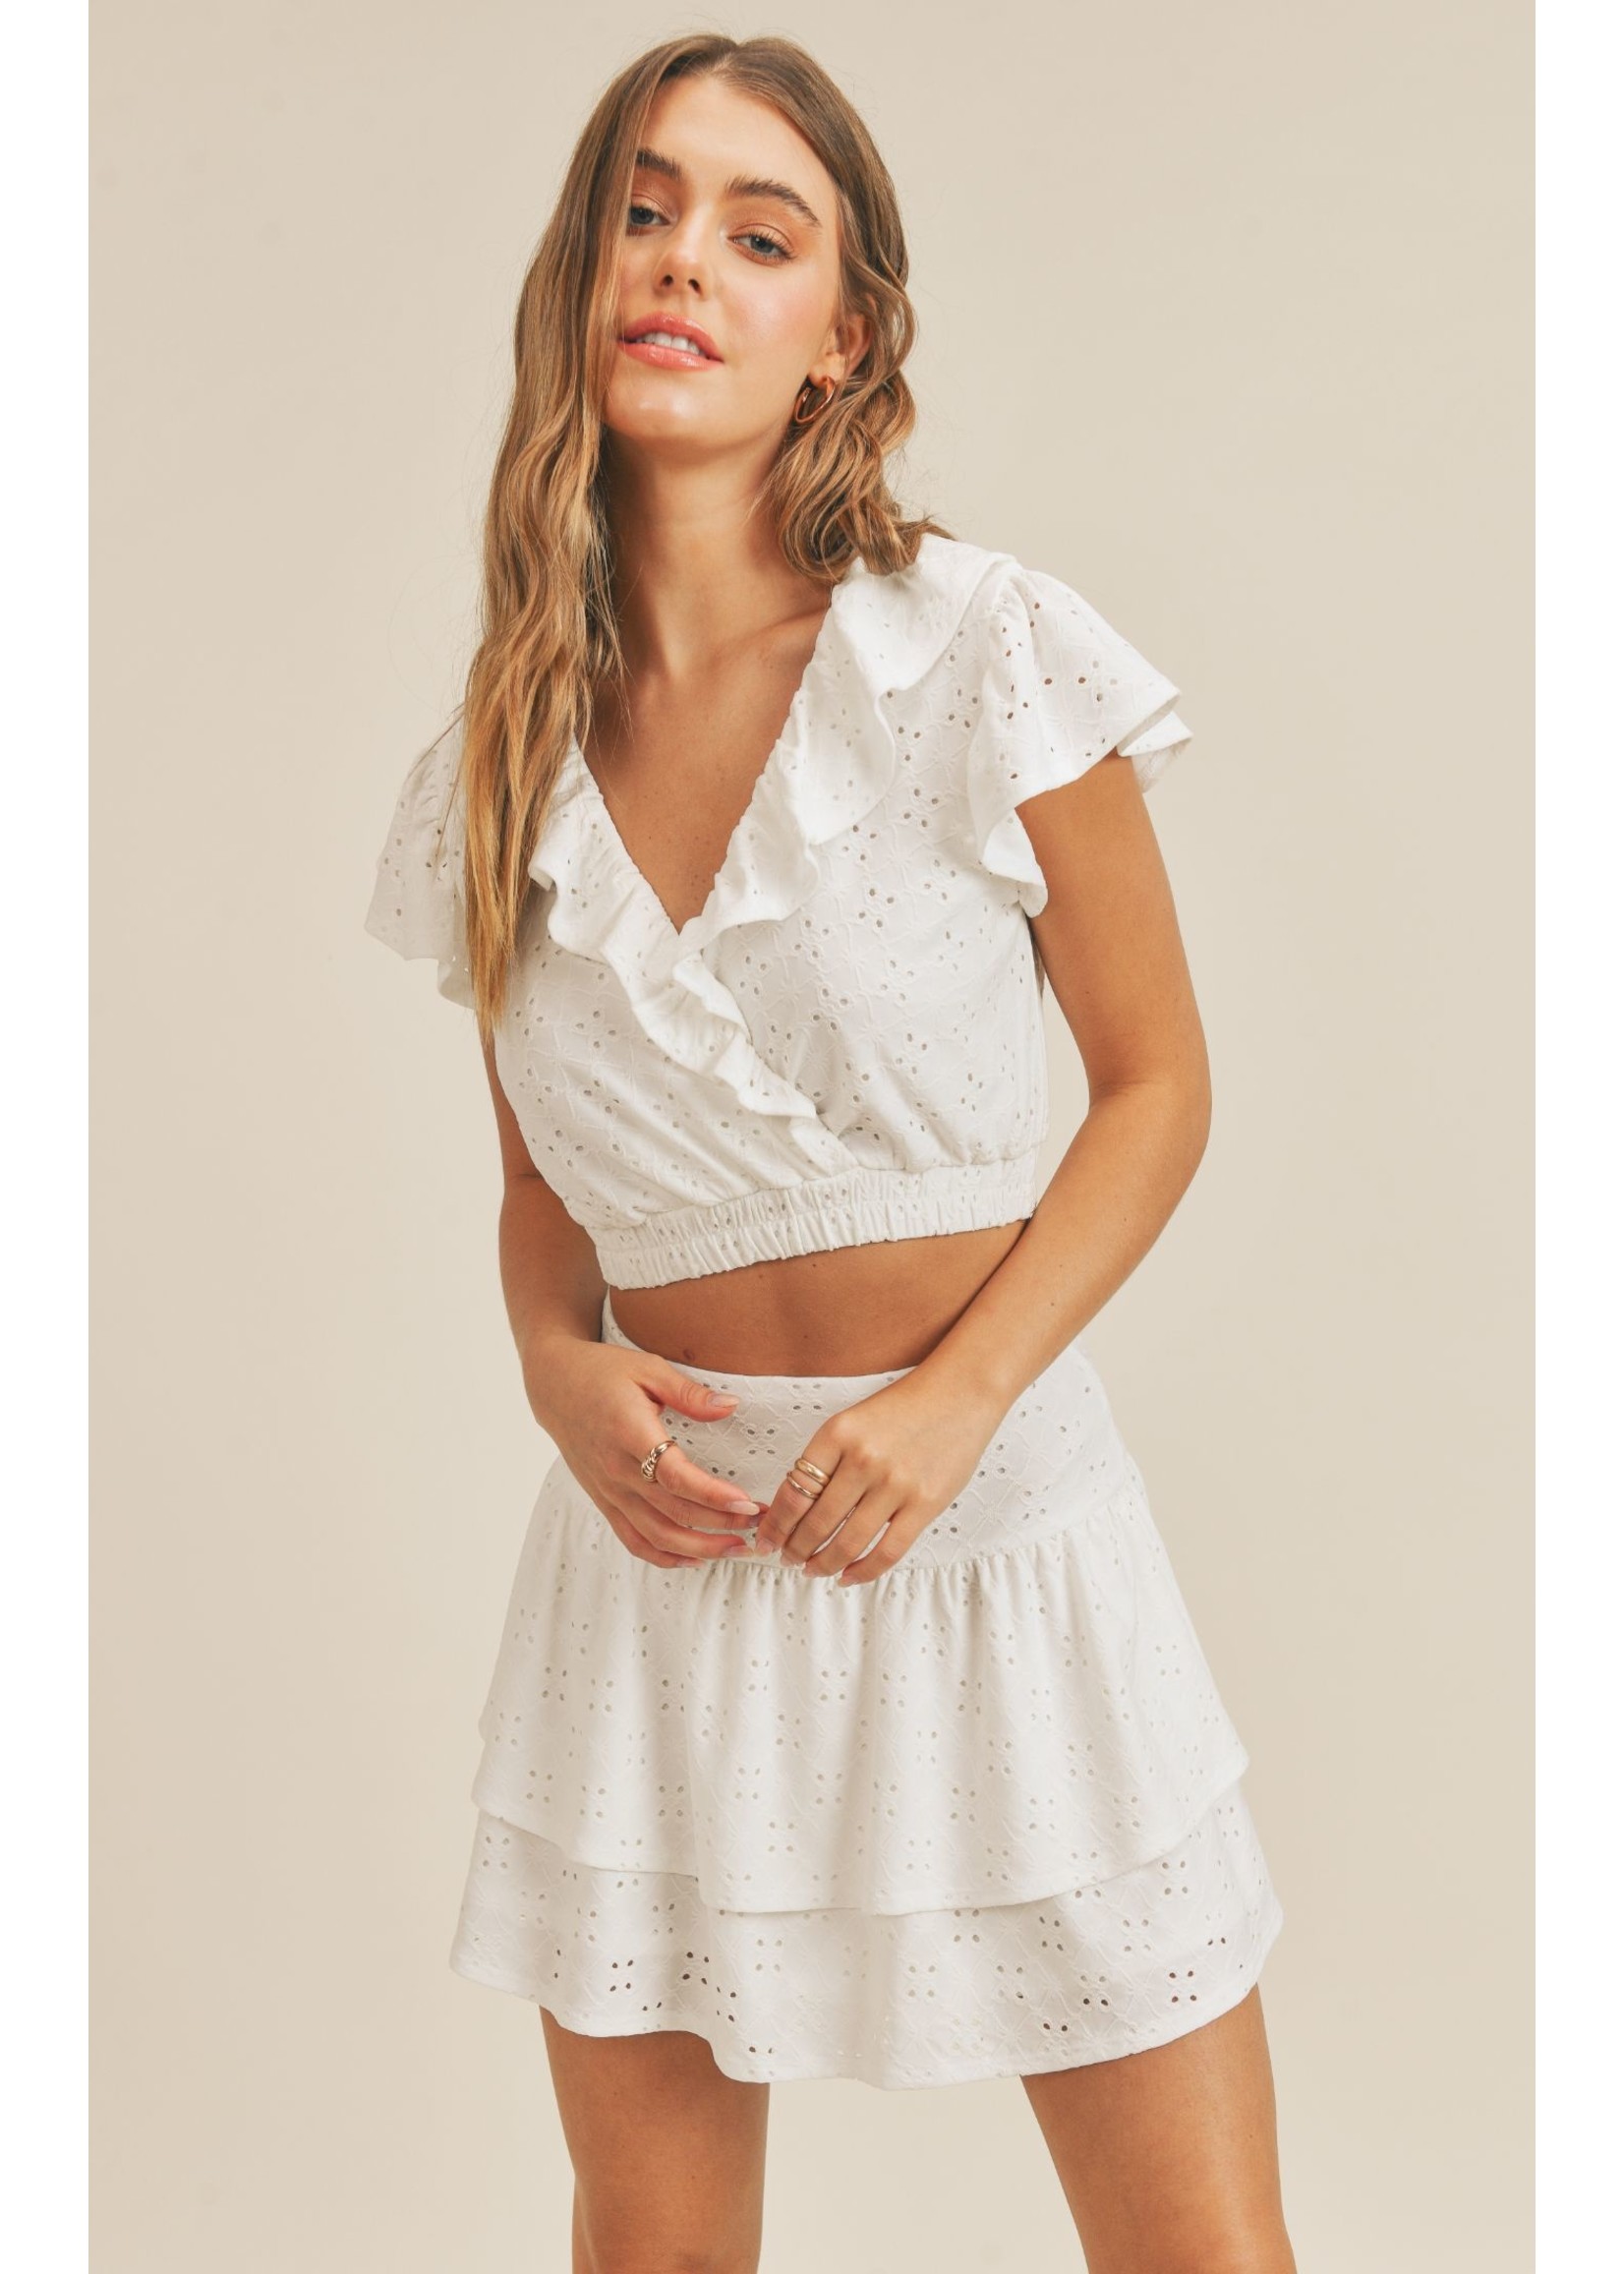 Sadie & Sage As You Are Ruffled Top - AD222260